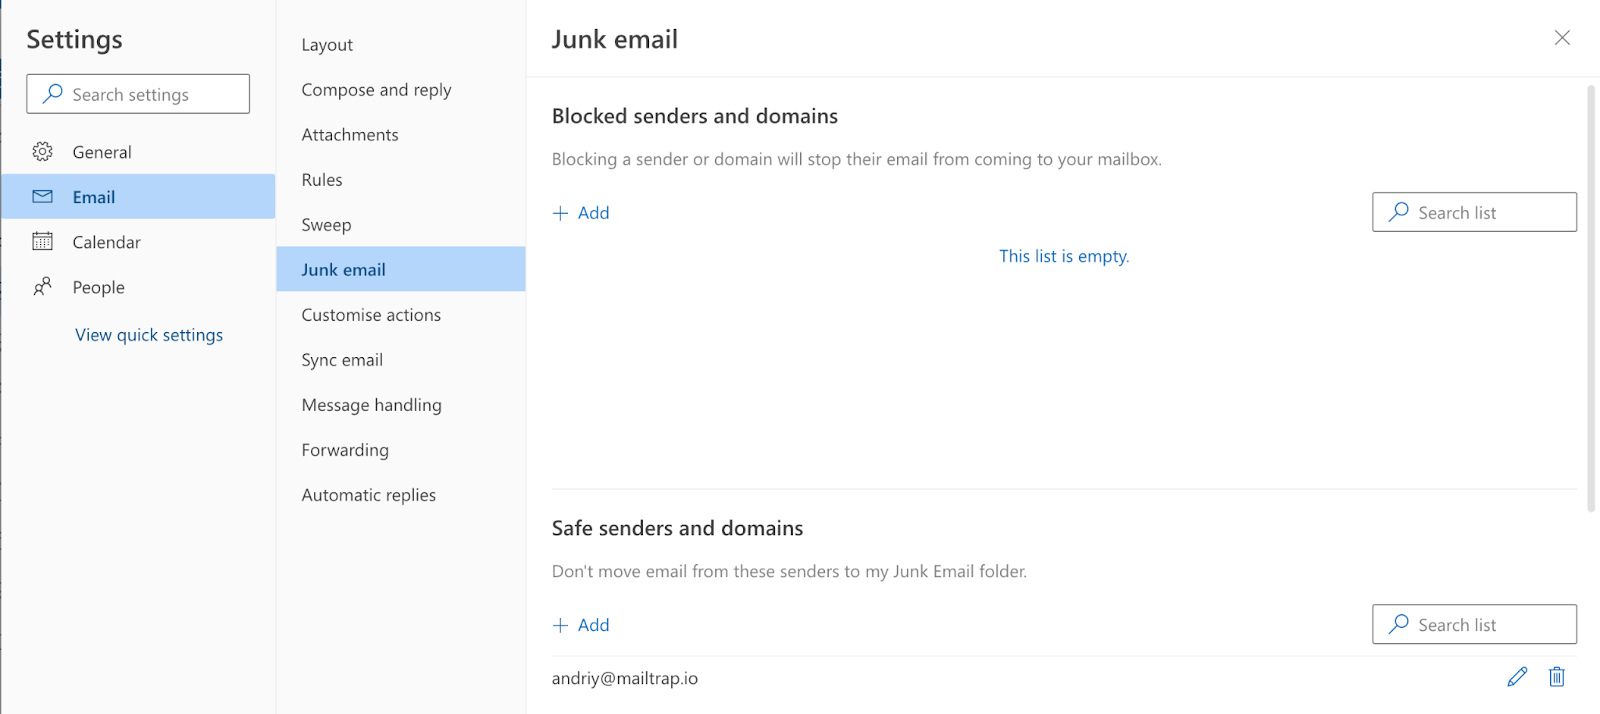 Adding contacts to safe senders in Outlook webmail